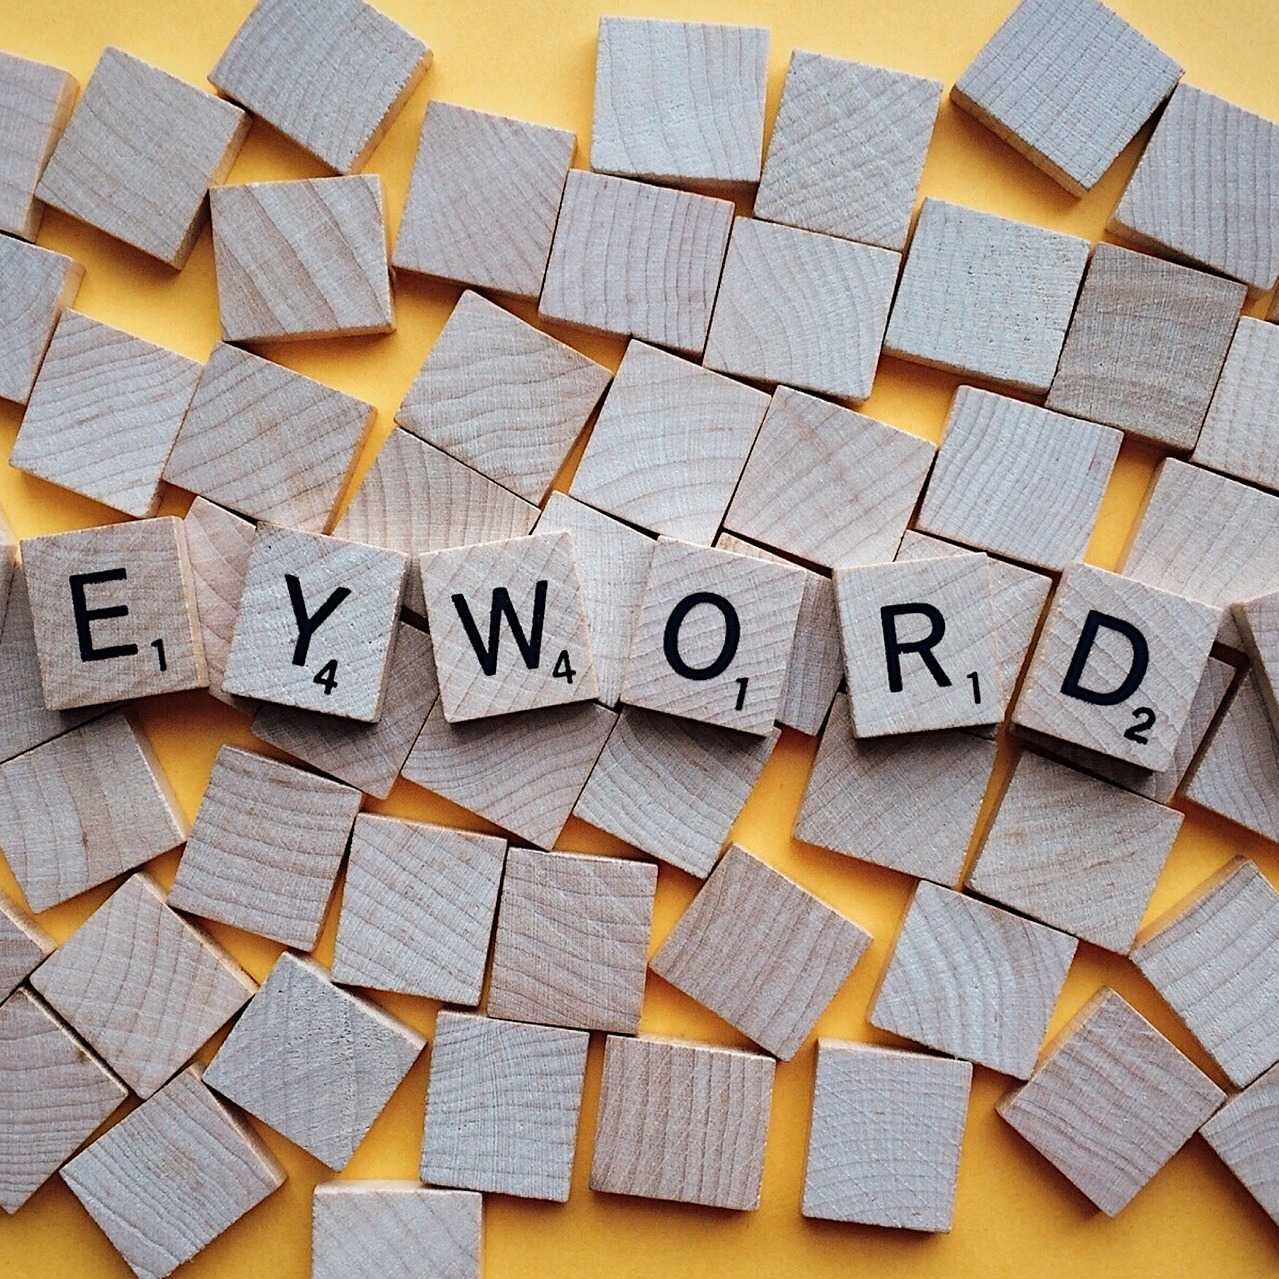 The English term Keyword means one or more words that users write in search engines to find and consult the websites of their interest